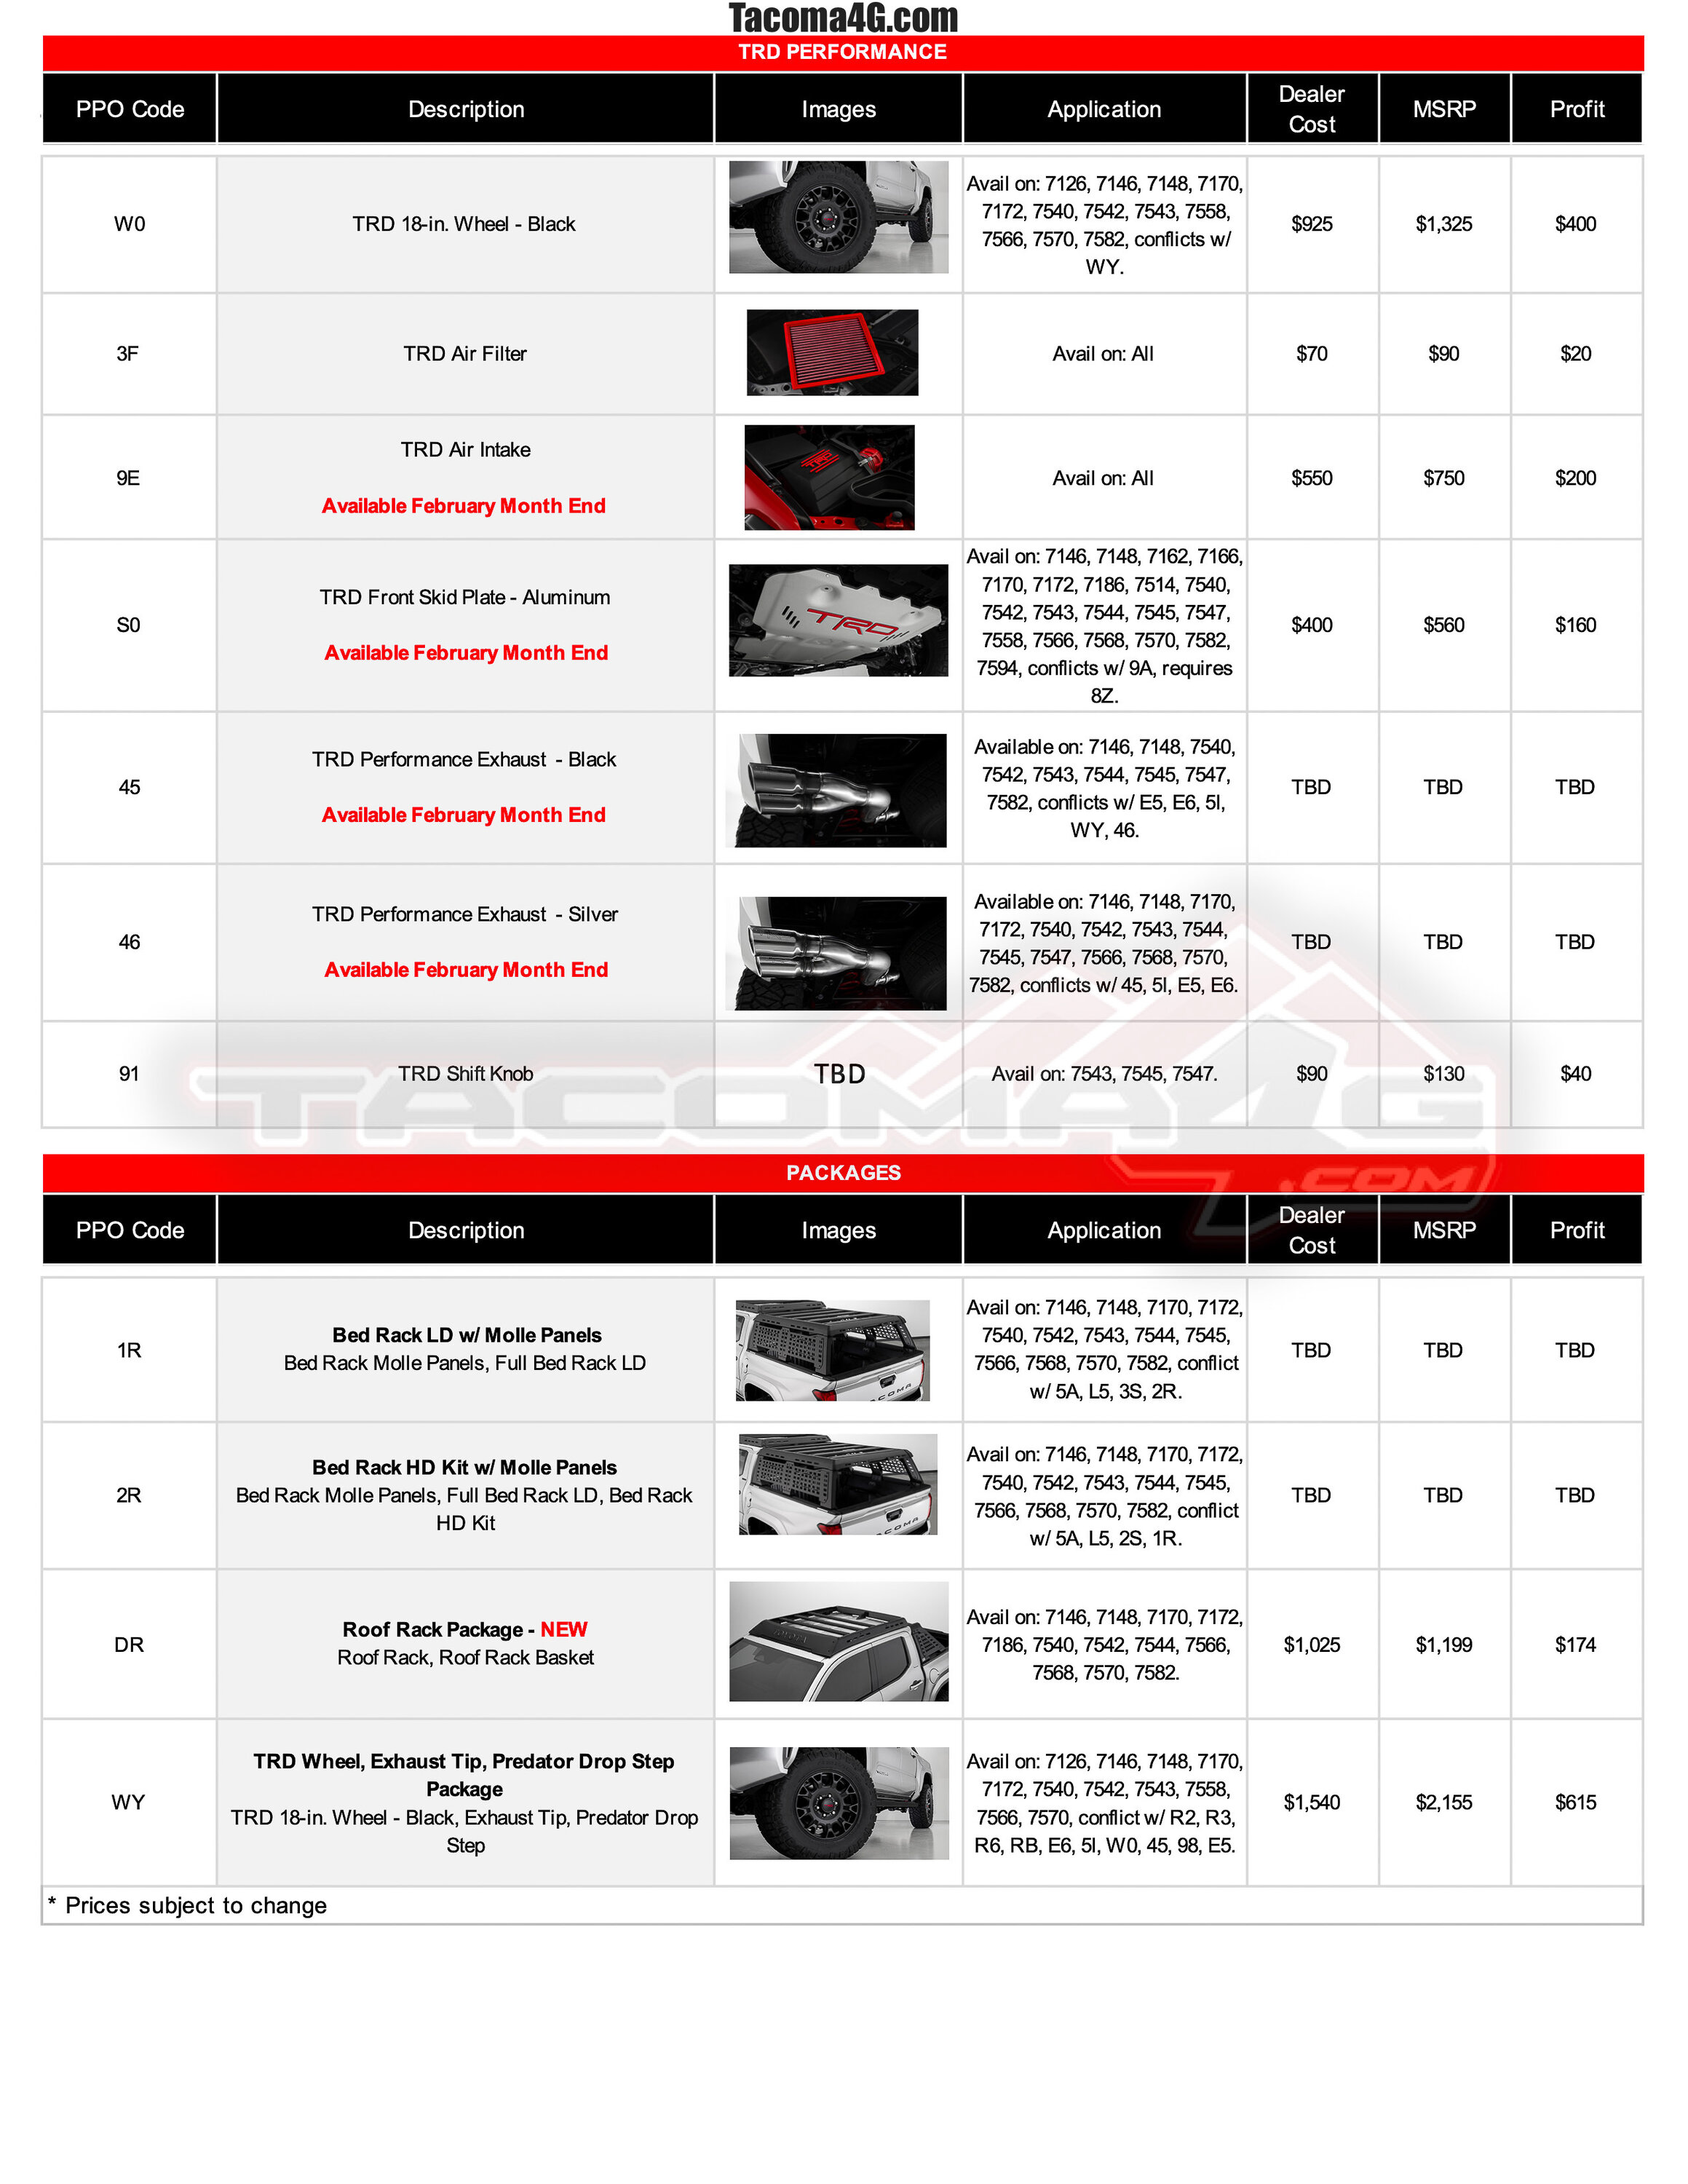 2024 Tacoma 2024 Tacoma Post-Production Options (PPO) Guide - OEM / TRD Accessories Parts + Pricing!  [UPDATED 4-24-24] 2024 Tacoma PPO Accessories Guide_02.09.24-6